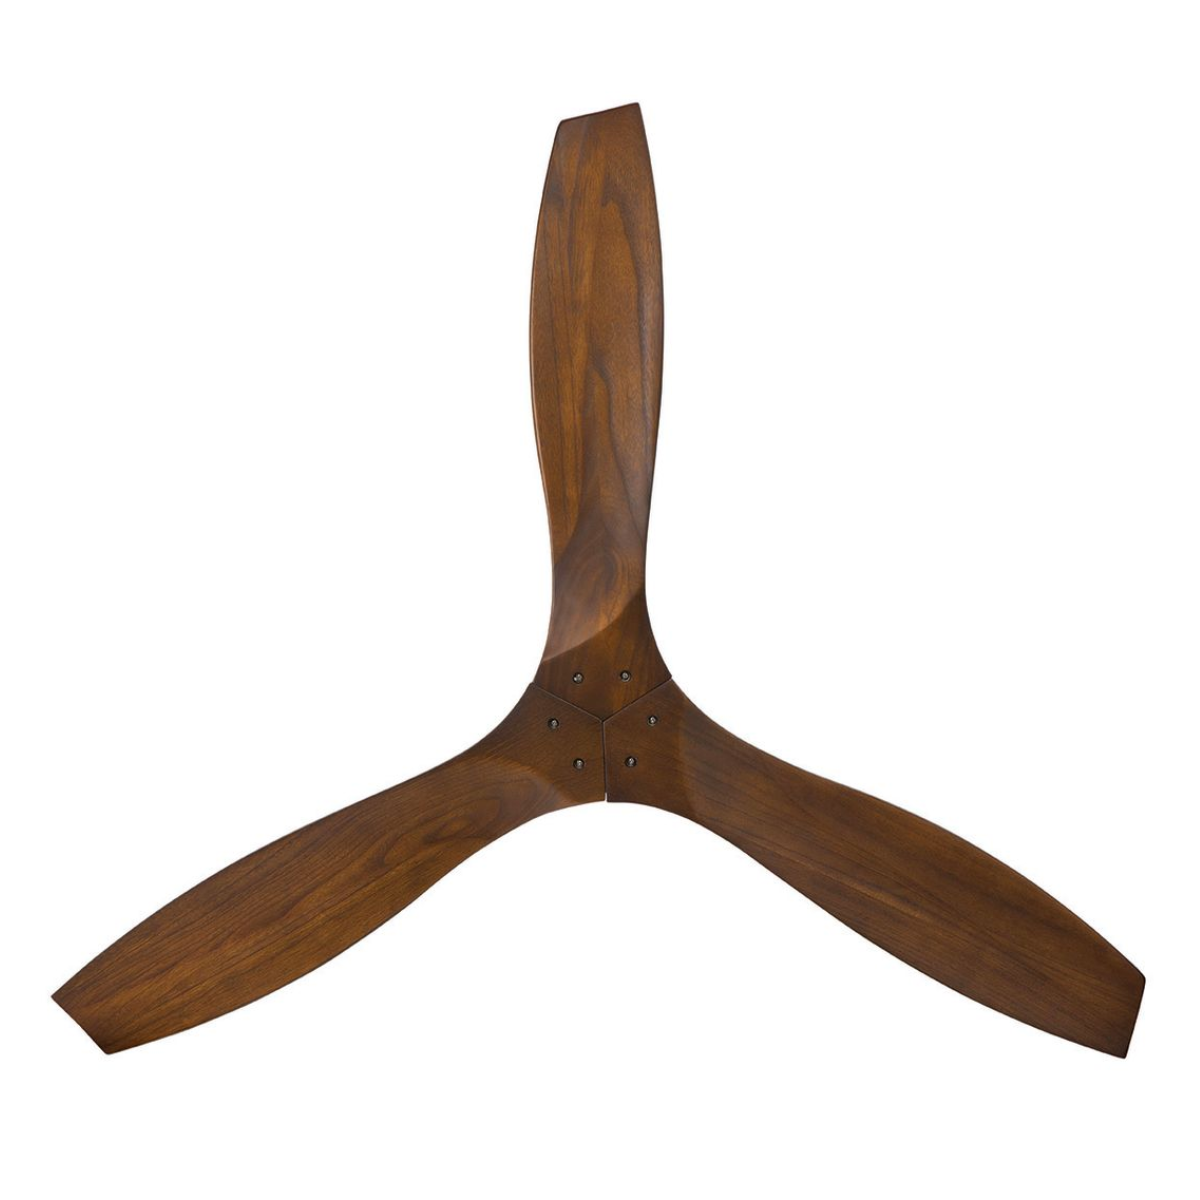 Product image of Mercury Ceiling Fan with Dark Timber Blades